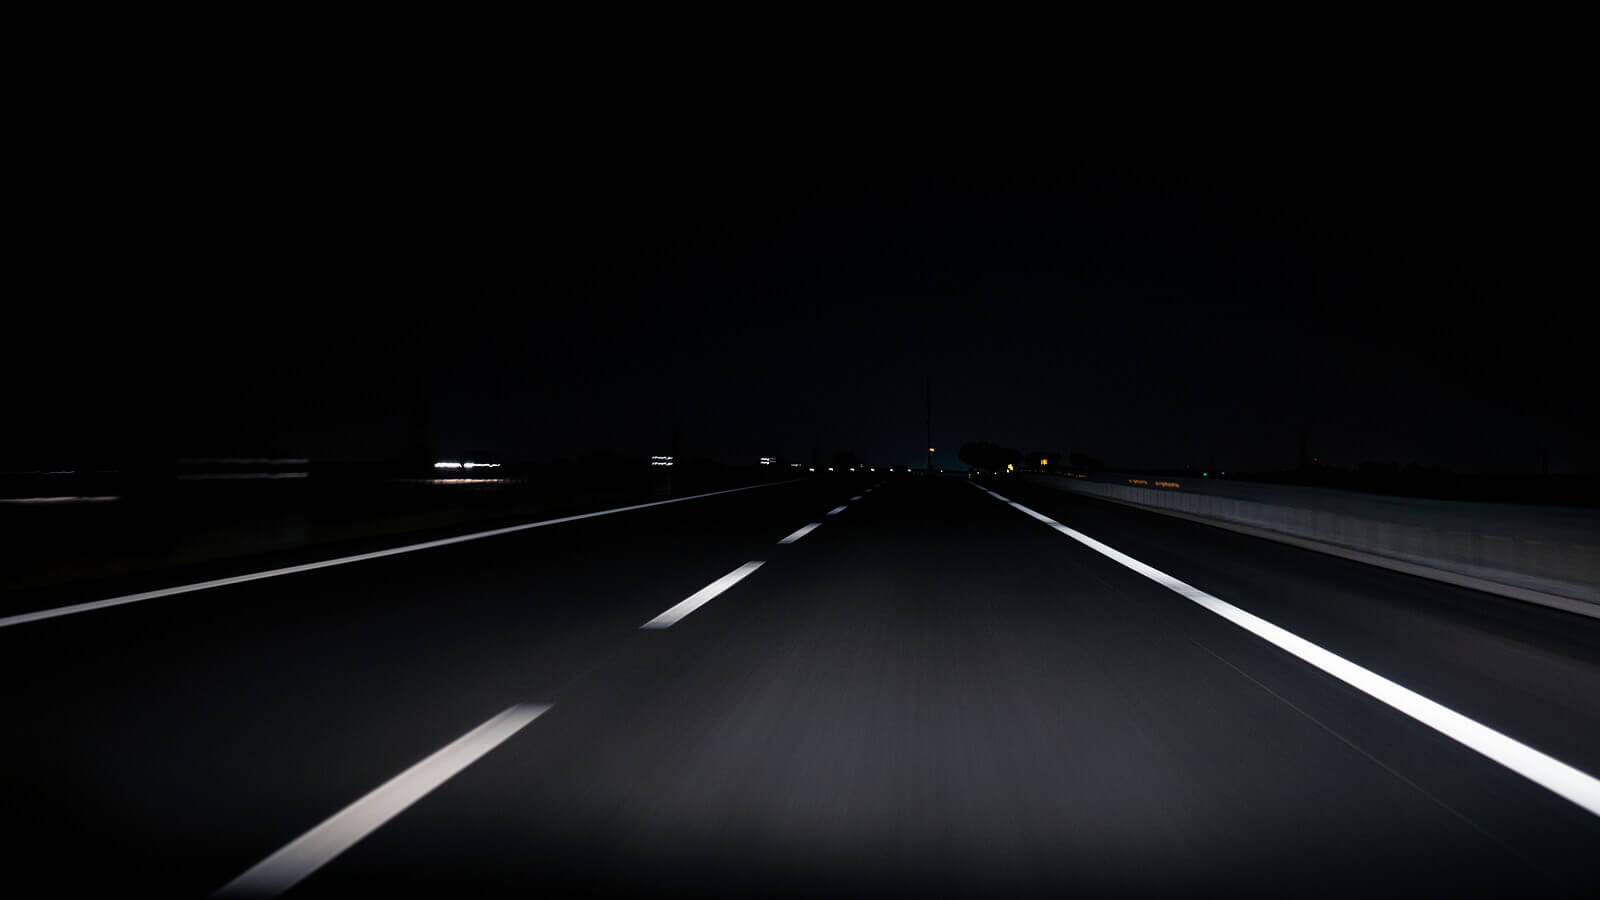 Dark road in the middle of the night. Driving anxiety treatment in Cranford, NJ can help you thrive.